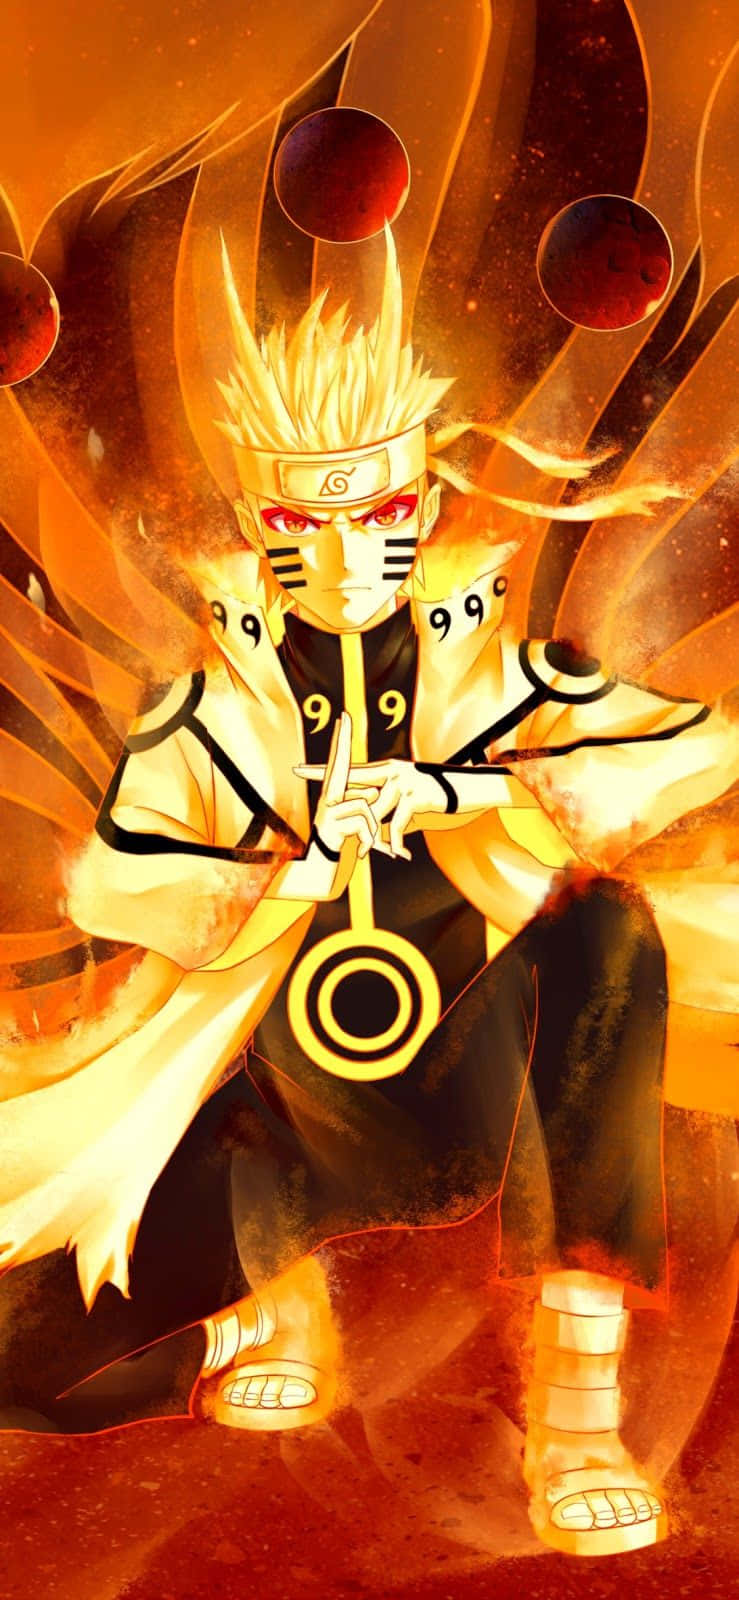 High-Def Wallpaper of Naruto Shippuden for your iPhone Wallpaper